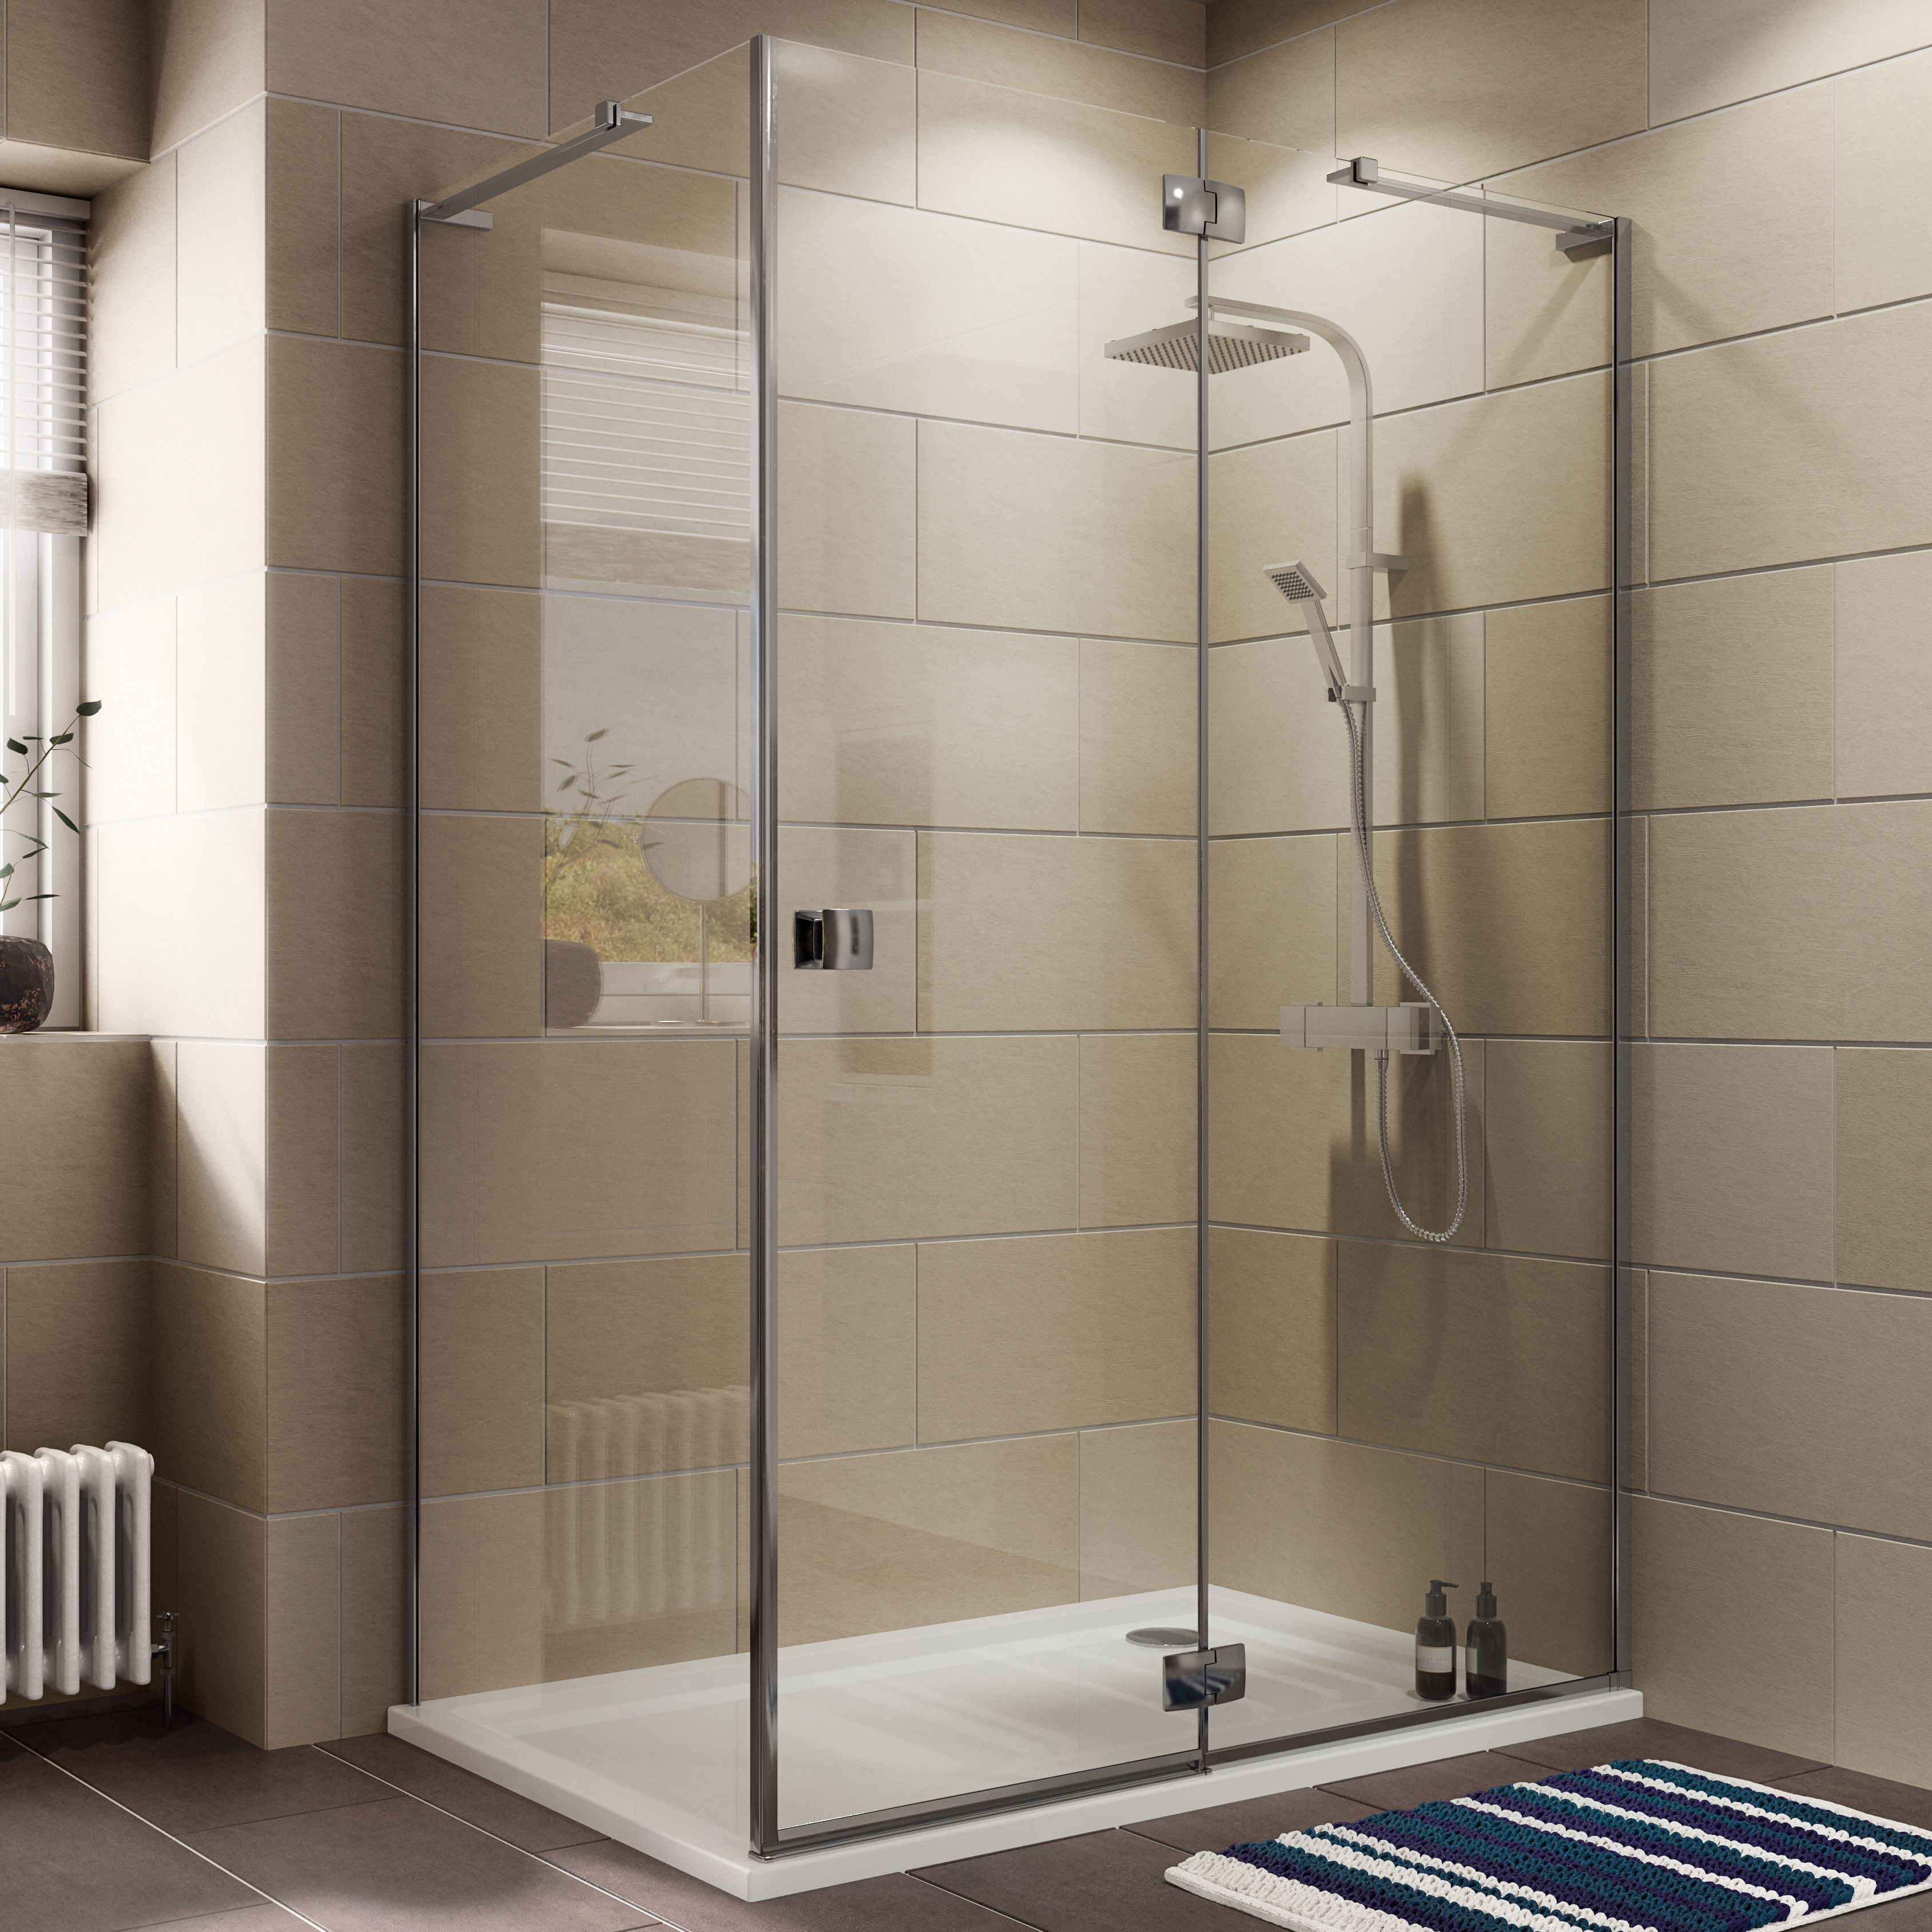 Cooke & Lewis Luxuriant Rectangular RH Shower Enclosure, Tray & Waste Pack with Hinged Door (W 